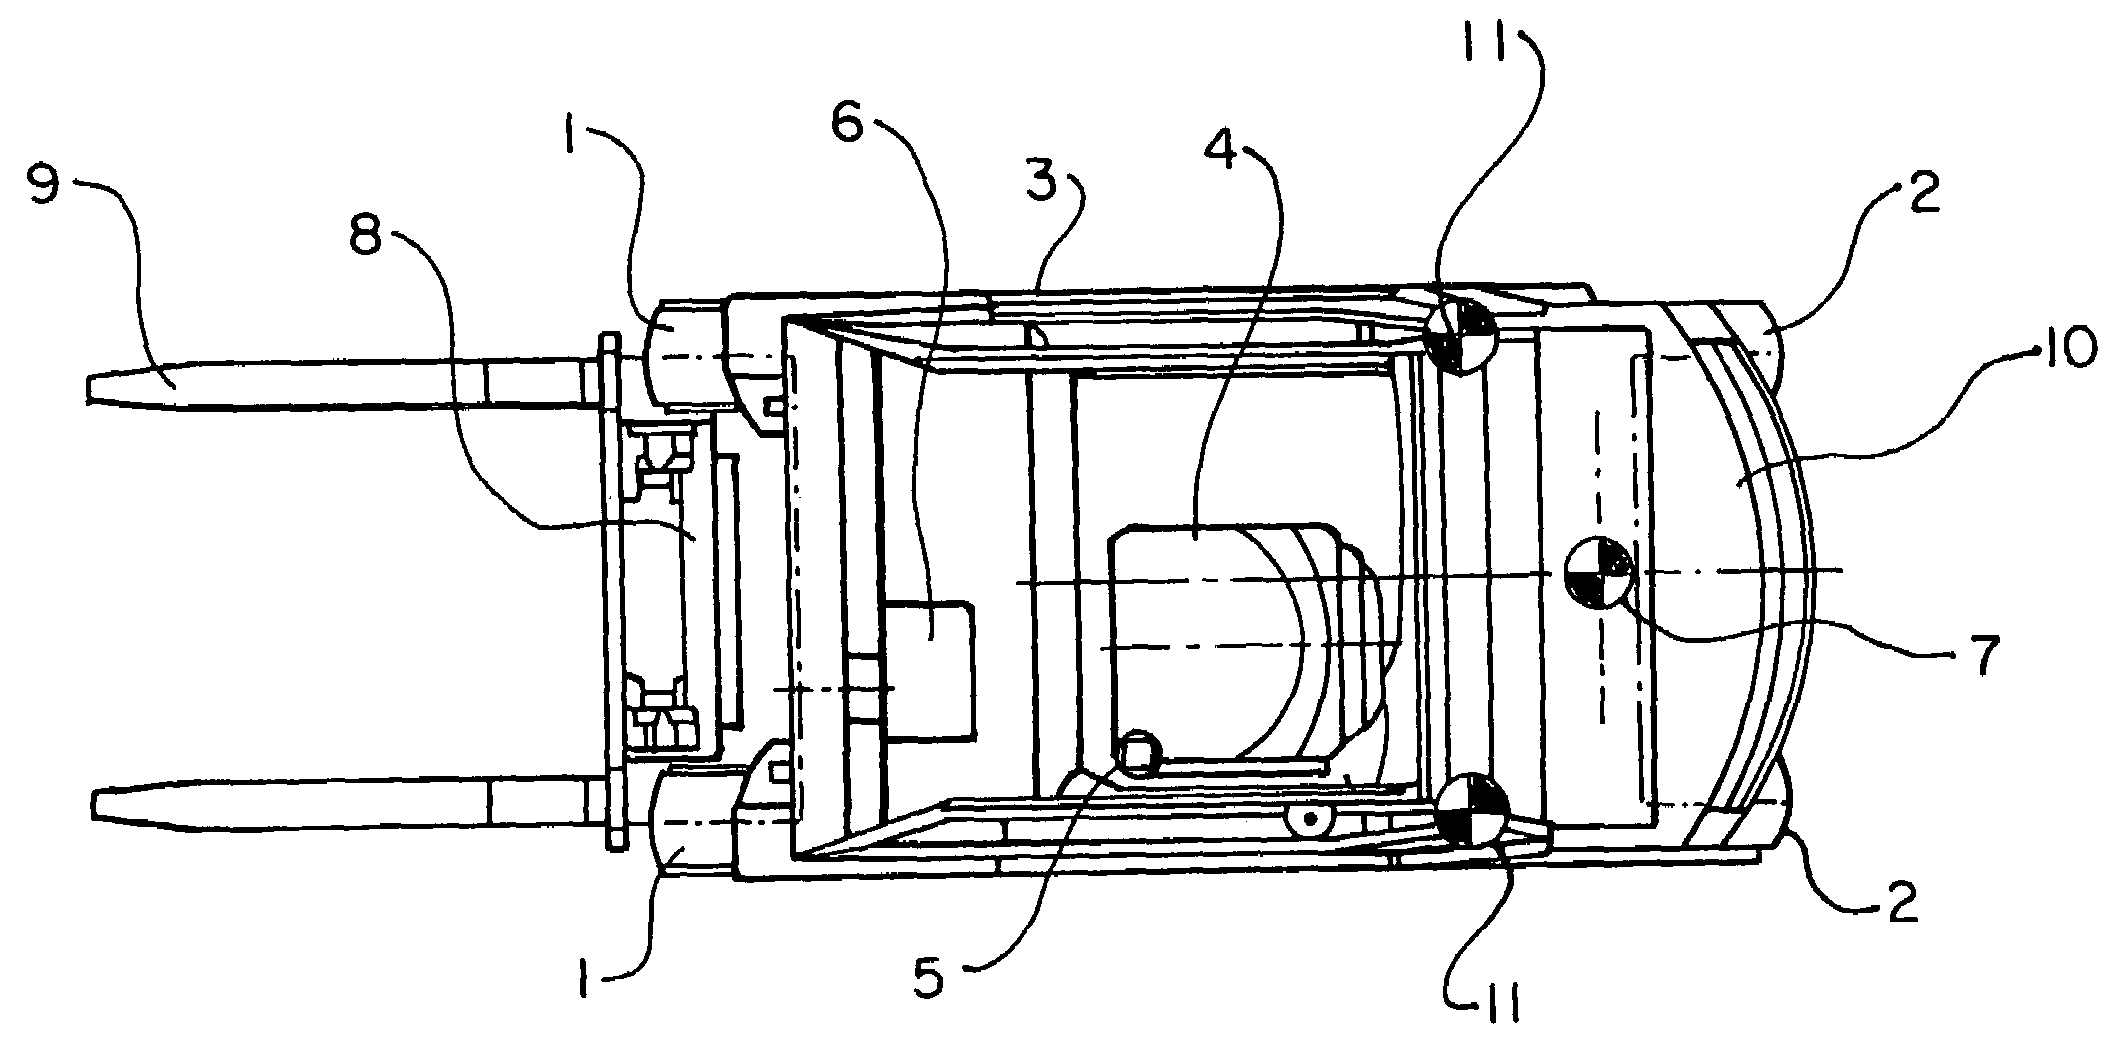 Industrial truck with a camera device